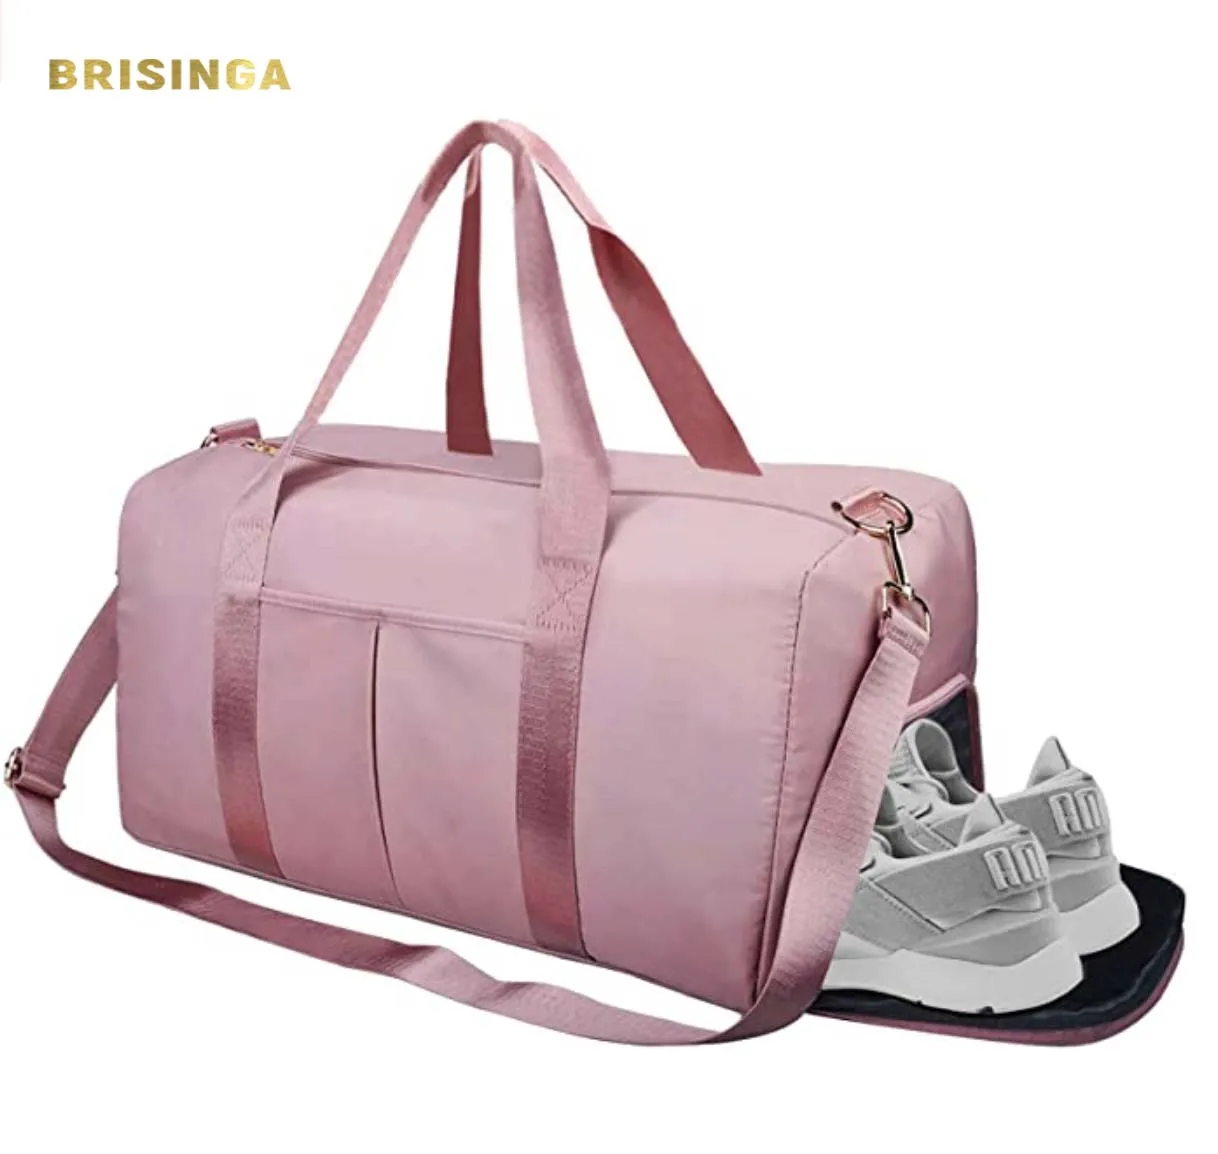 Wholesale Womens Travel Bags Travel Luggage Bags On Sale Pink Duffle Bag  Travel - Buy Organizer Bag For Travel,Fitness Bag Gym Travel,Overnight Travel  Bags Duffle Product on Alibaba.com